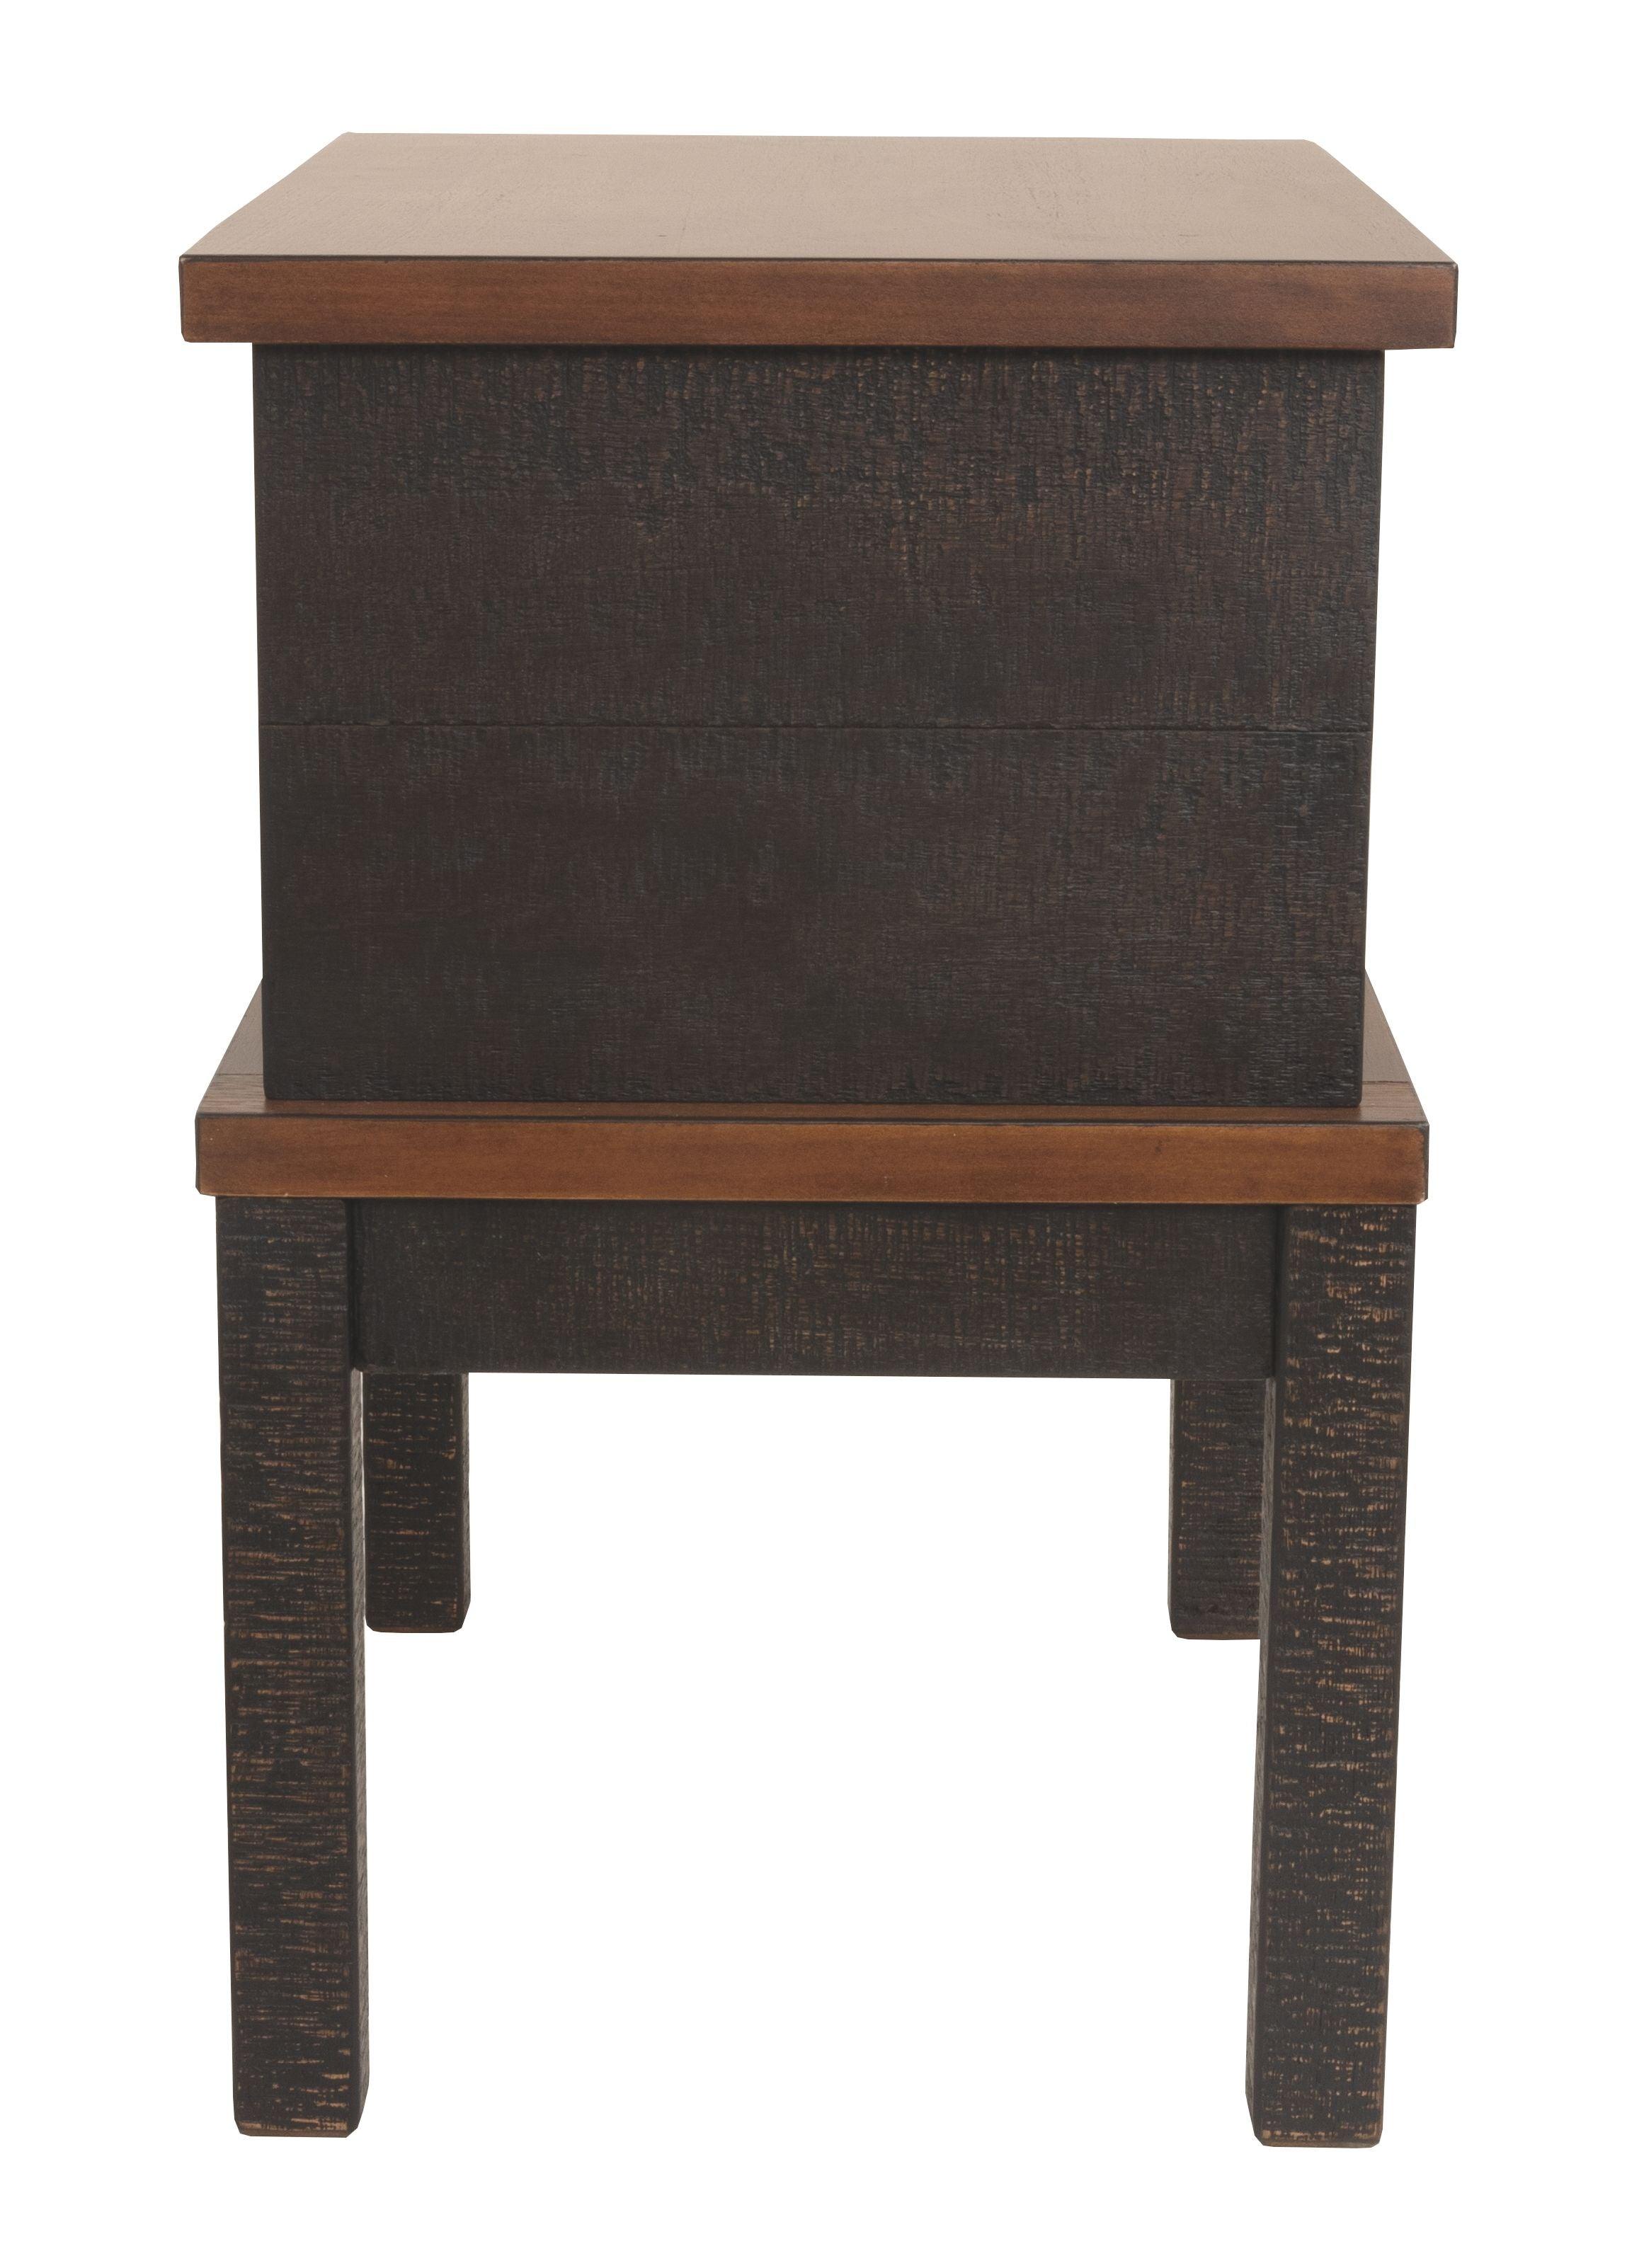 Ashley Furniture - Stanah - Brown / Beige - Chair Side End Table - 5th Avenue Furniture